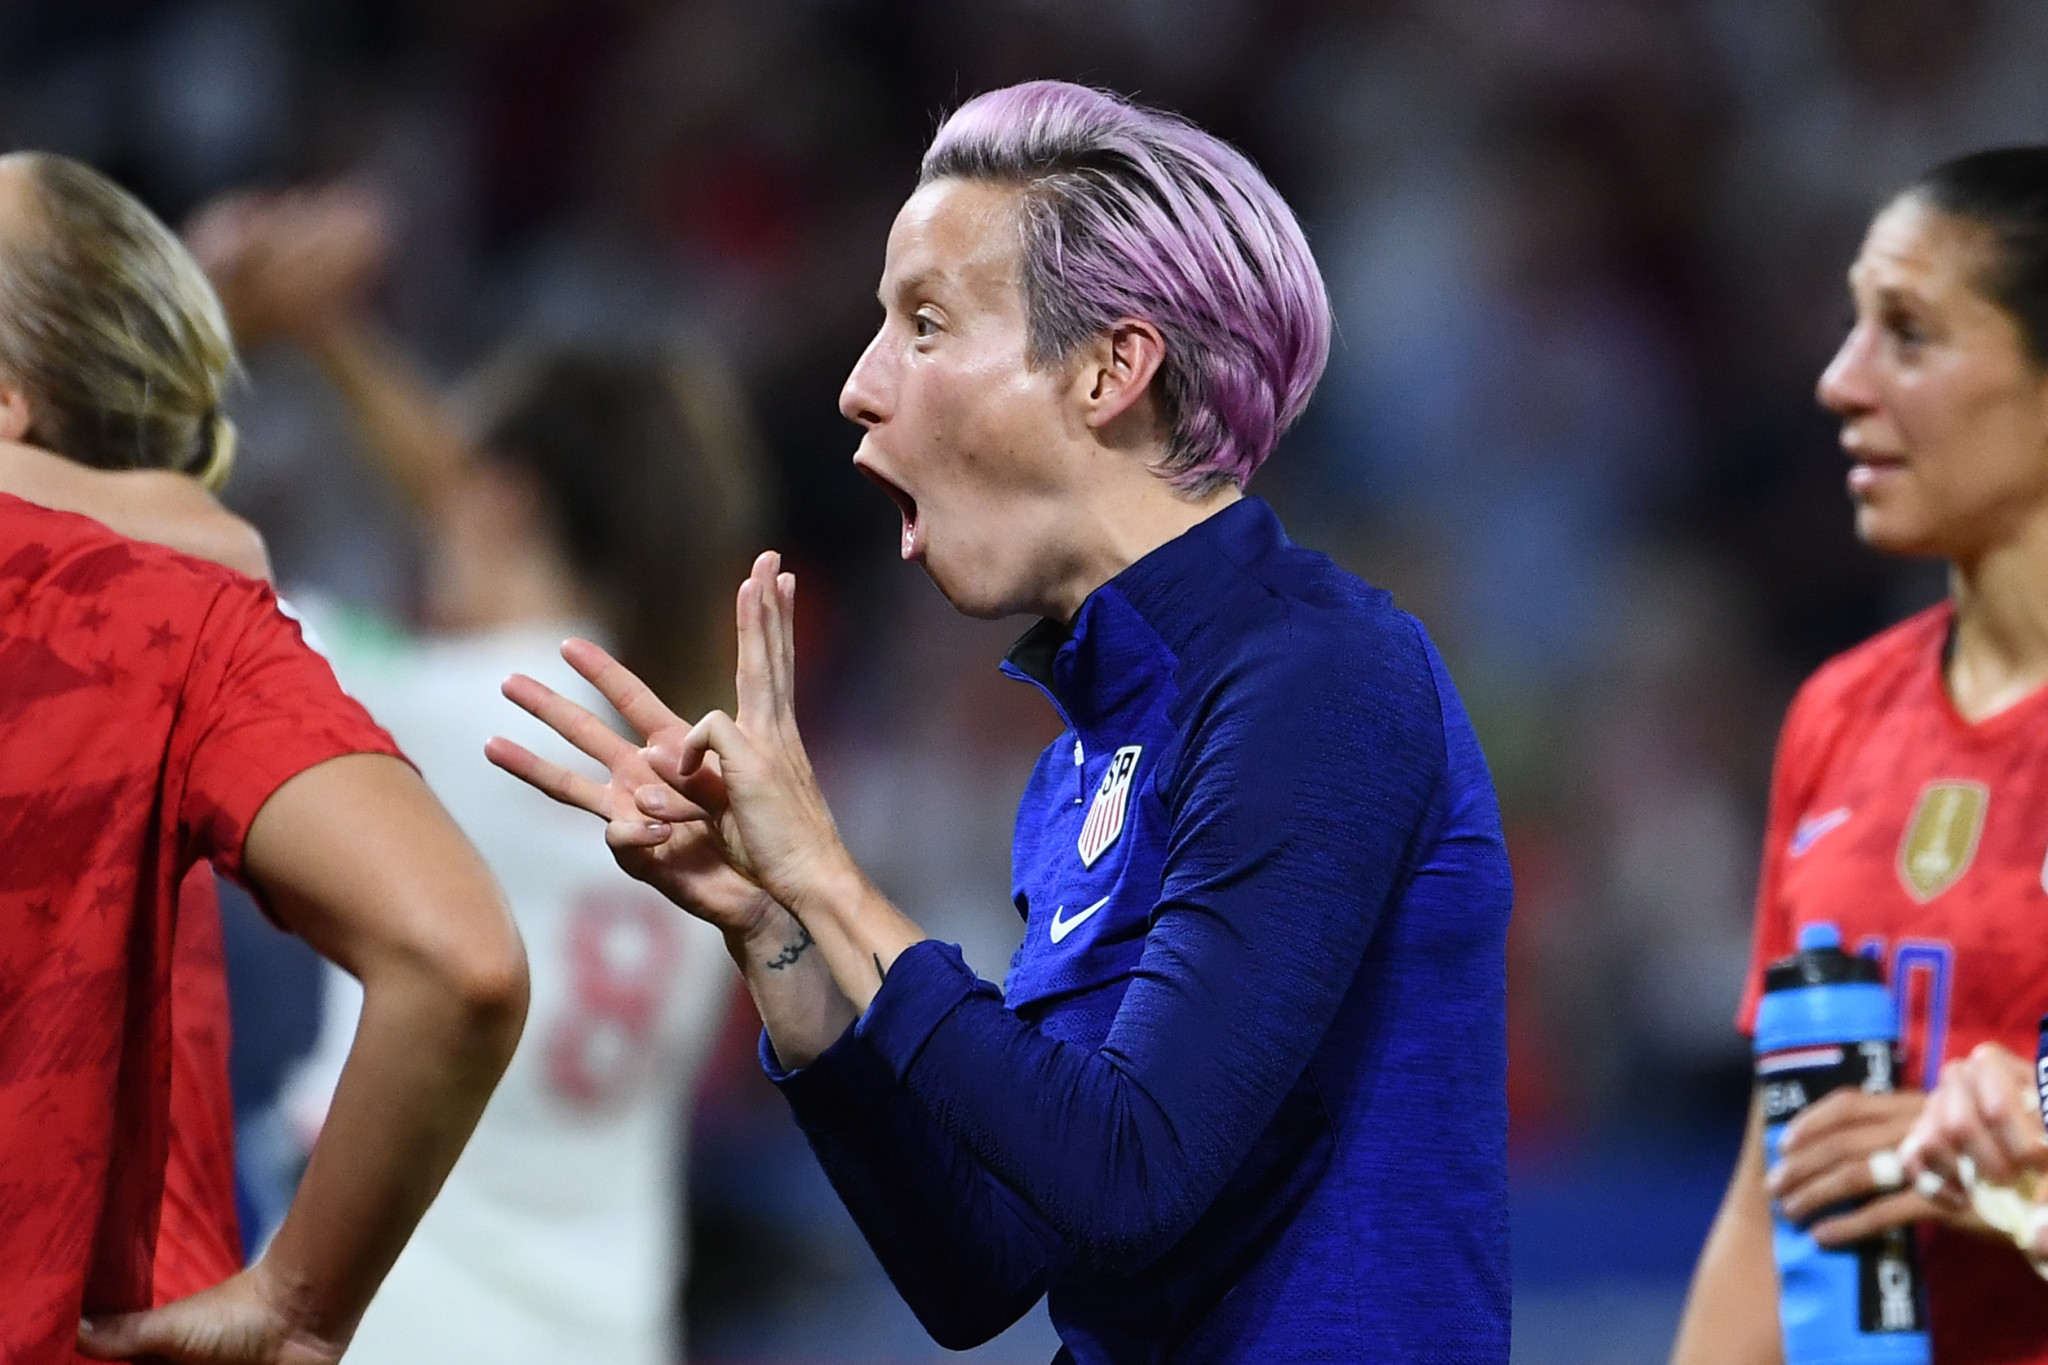 American Megan Rapinoe has criticised the scheduling of two other matches on the same day as the FIFA Women's World Cup final ©Getty Images